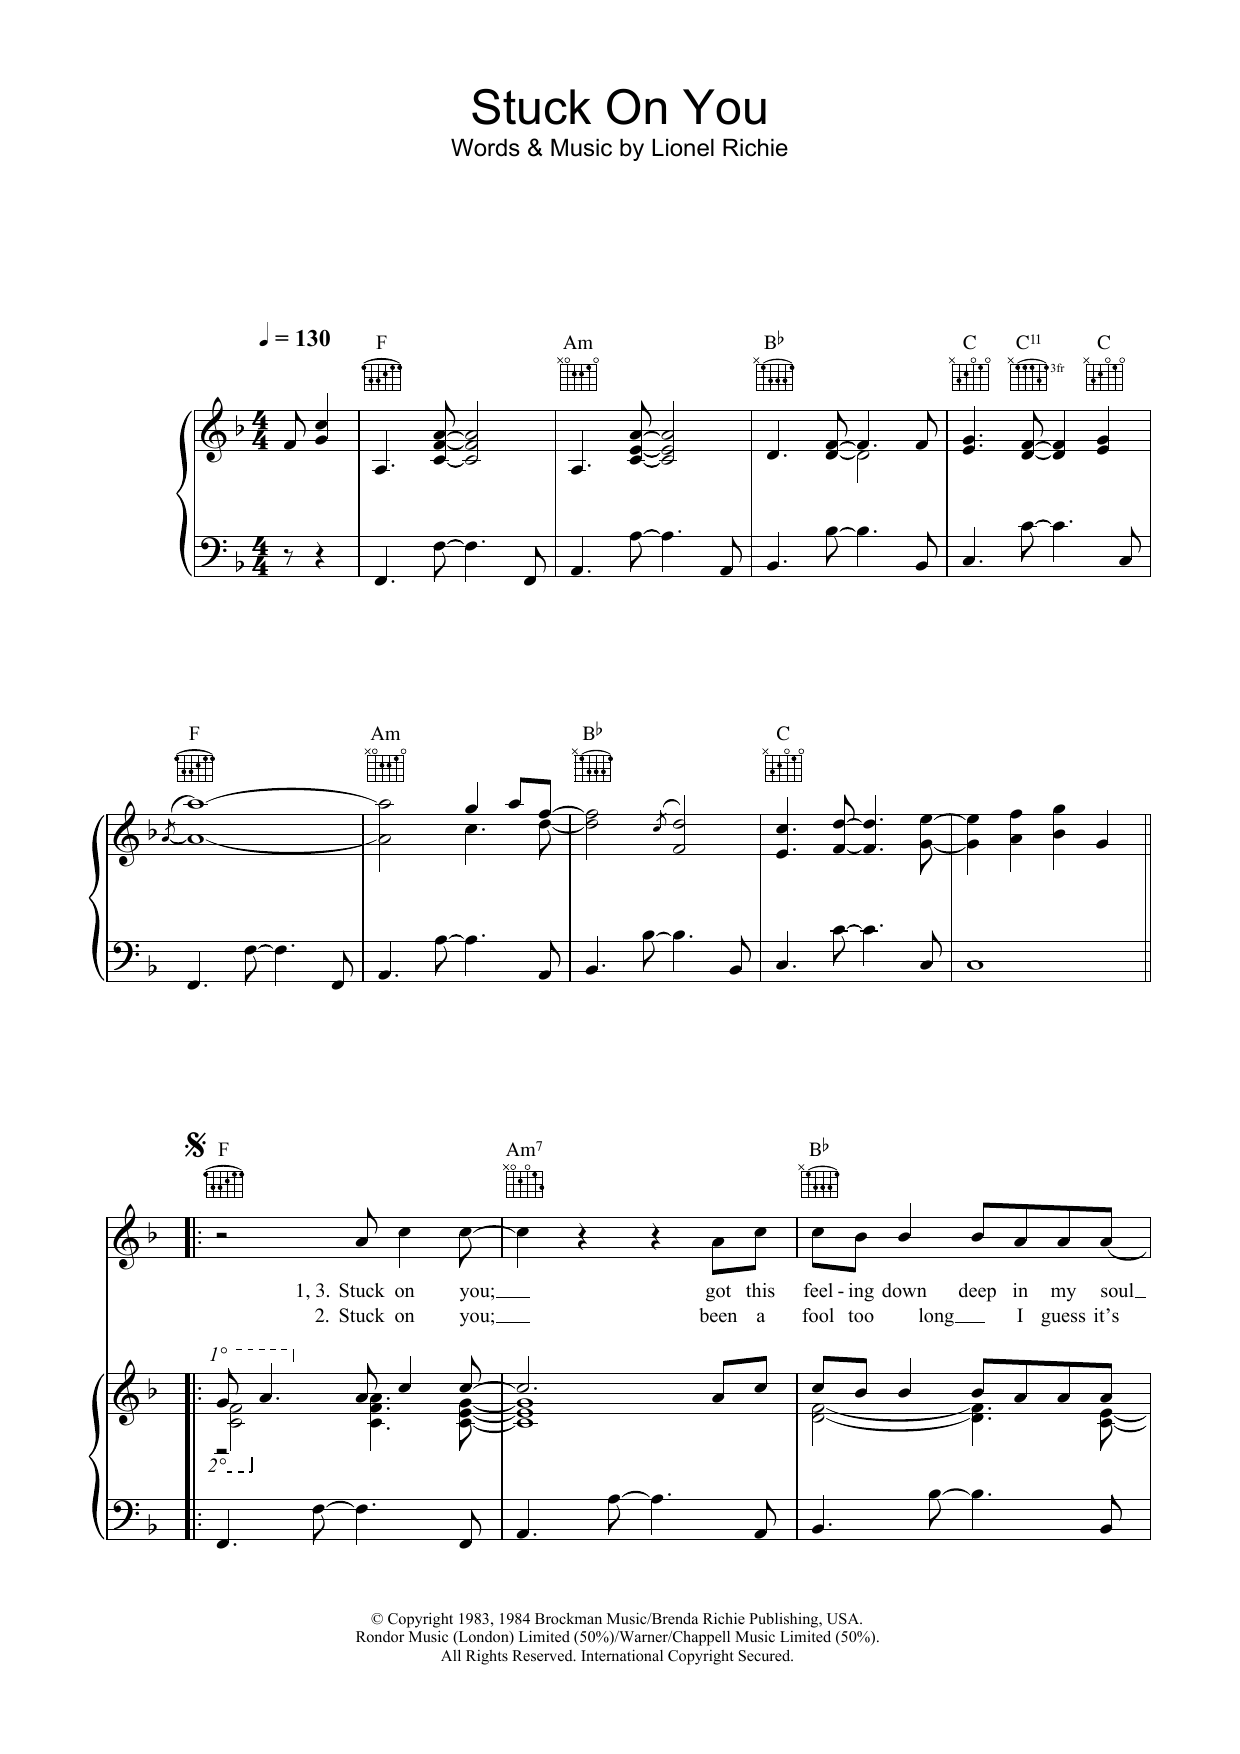 Stuck on You Sheet Music - 5 Arrangements Available Instantly